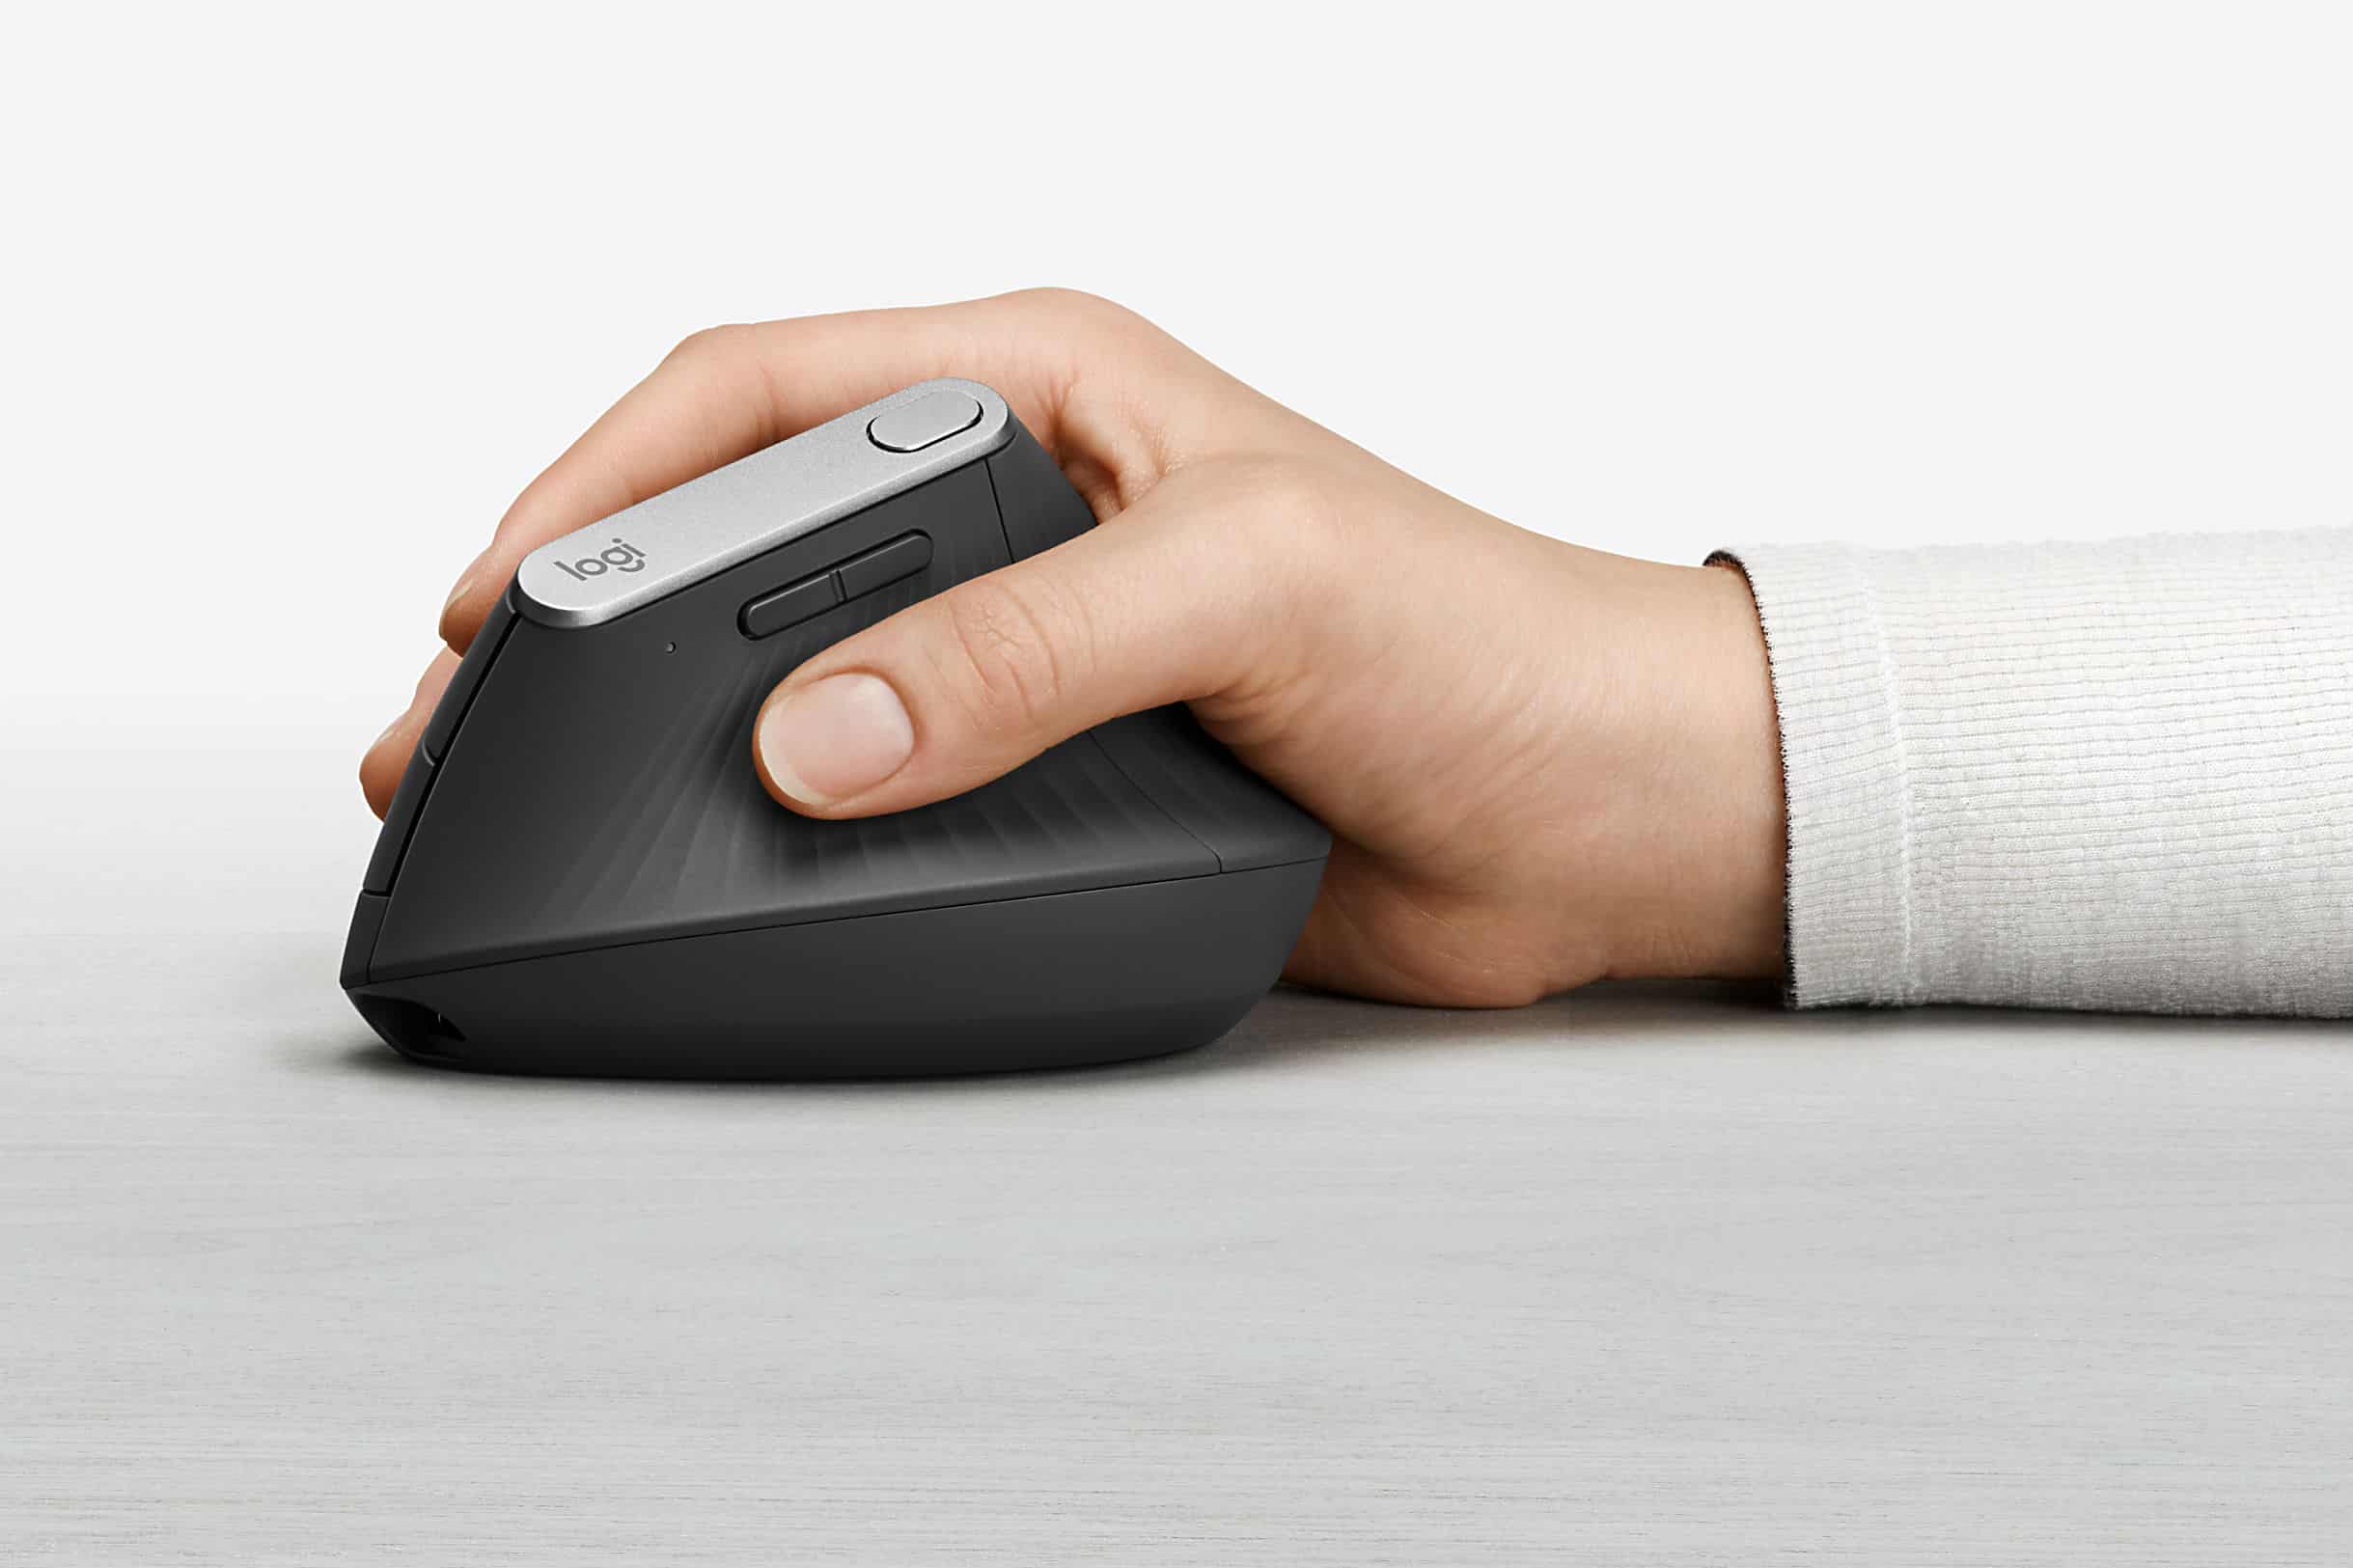 The Logitech MX Vertical ergonomic mouse is here to save your wrist.